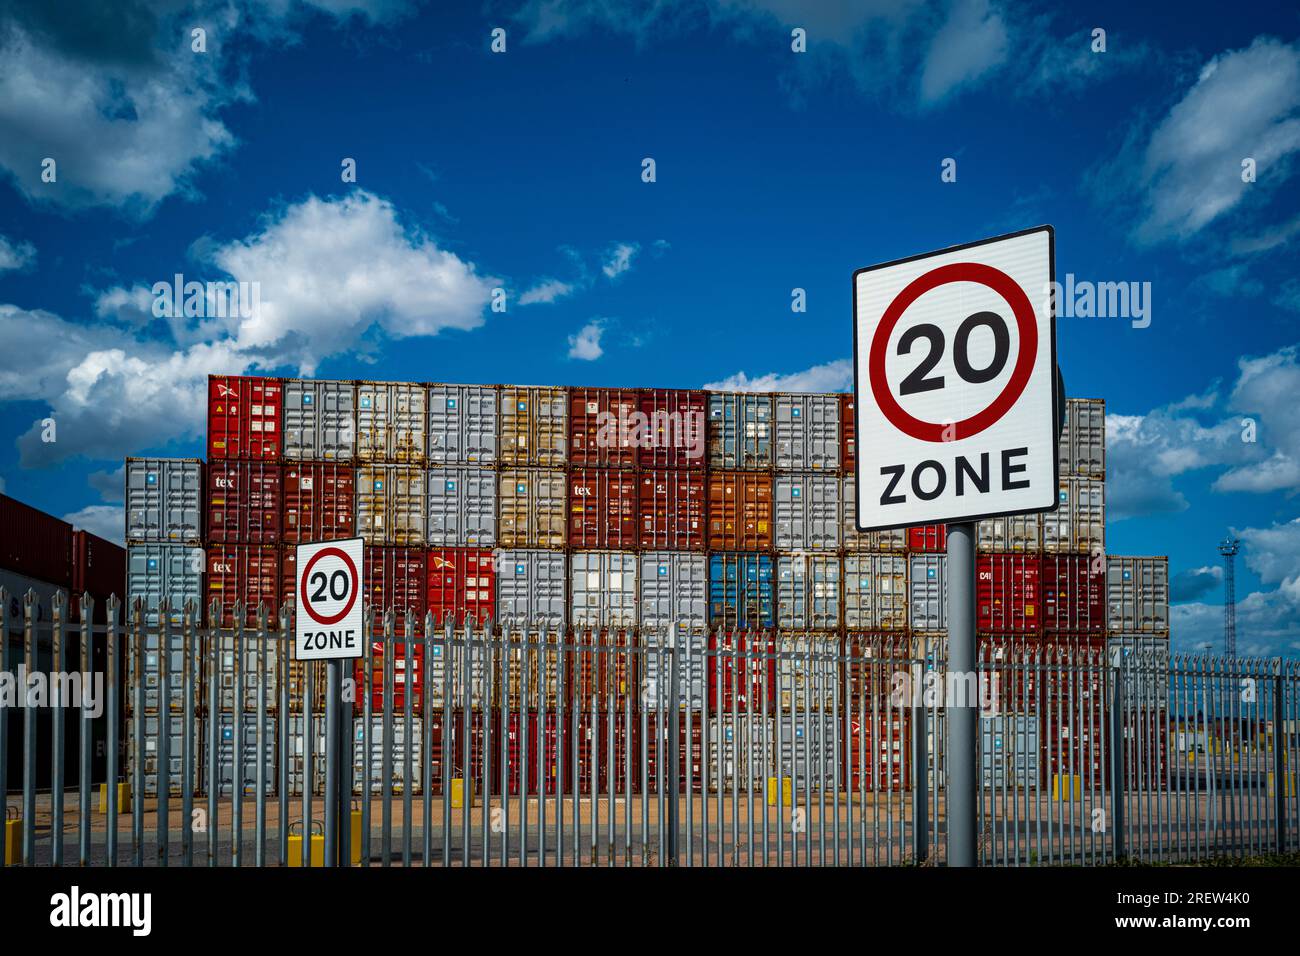 Shipping containers at the Port of Felixstowe, the UK's largest container port. Felixstowe Port shipping containers. Stock Photo